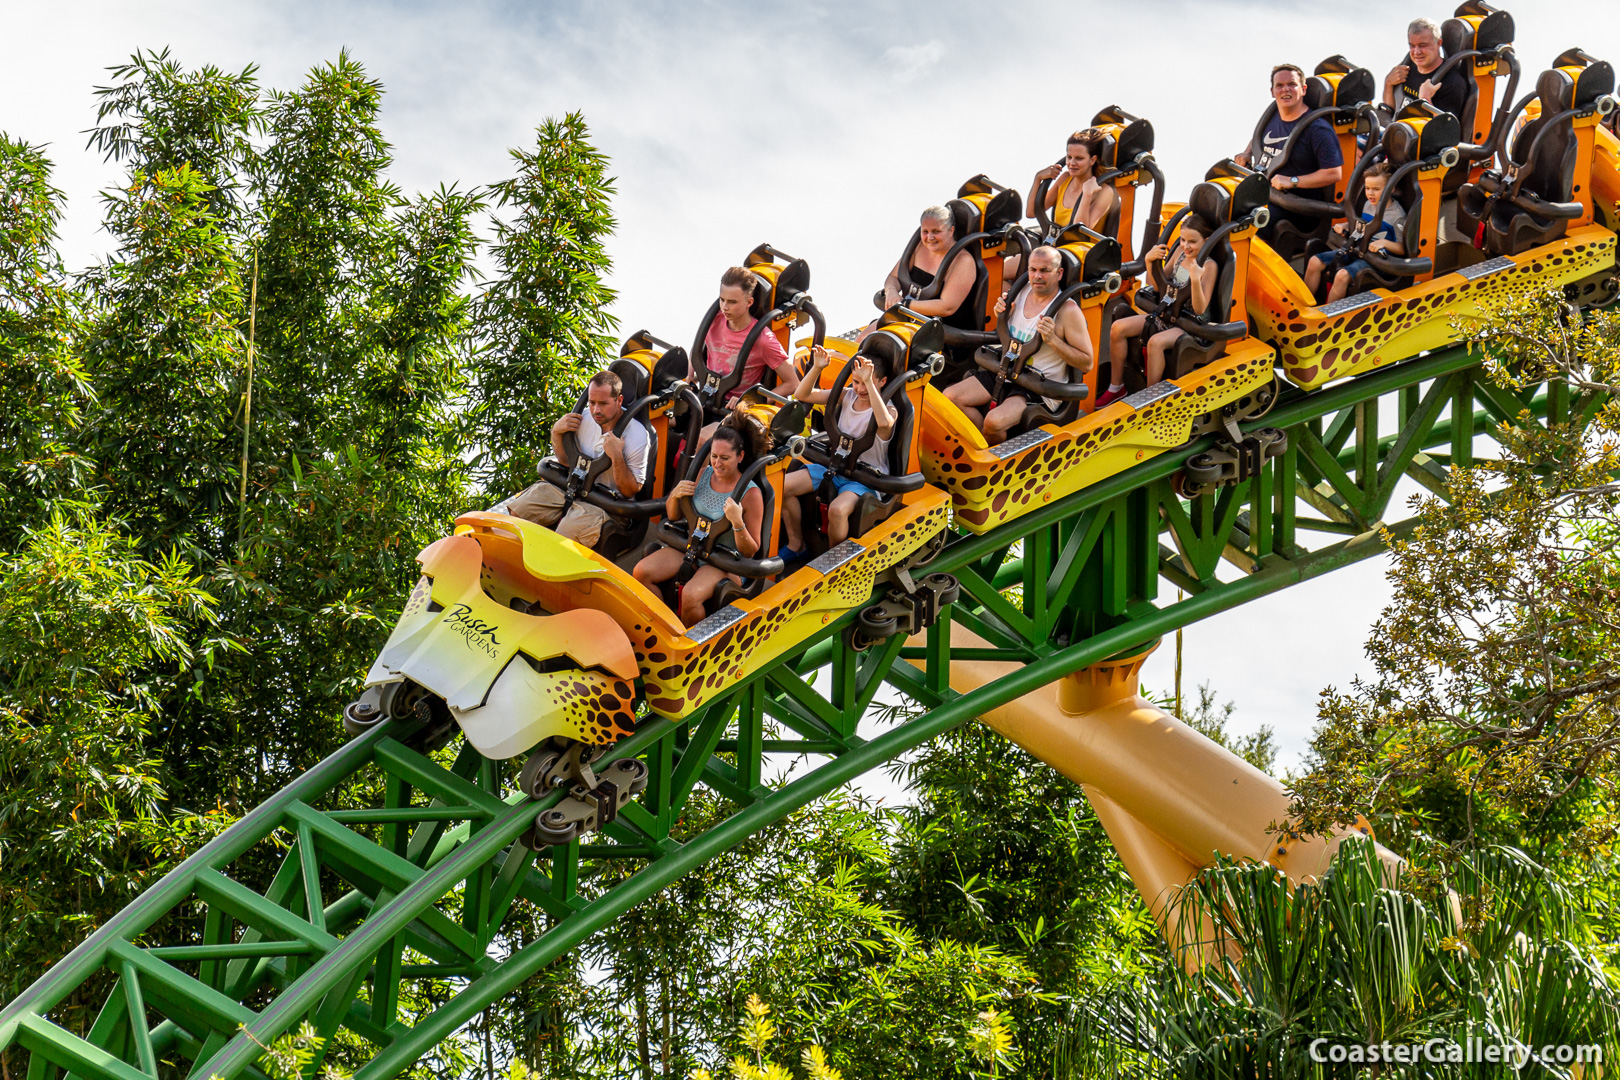 Pictures of the Cheetah Hunt train on an exciting roller coaster